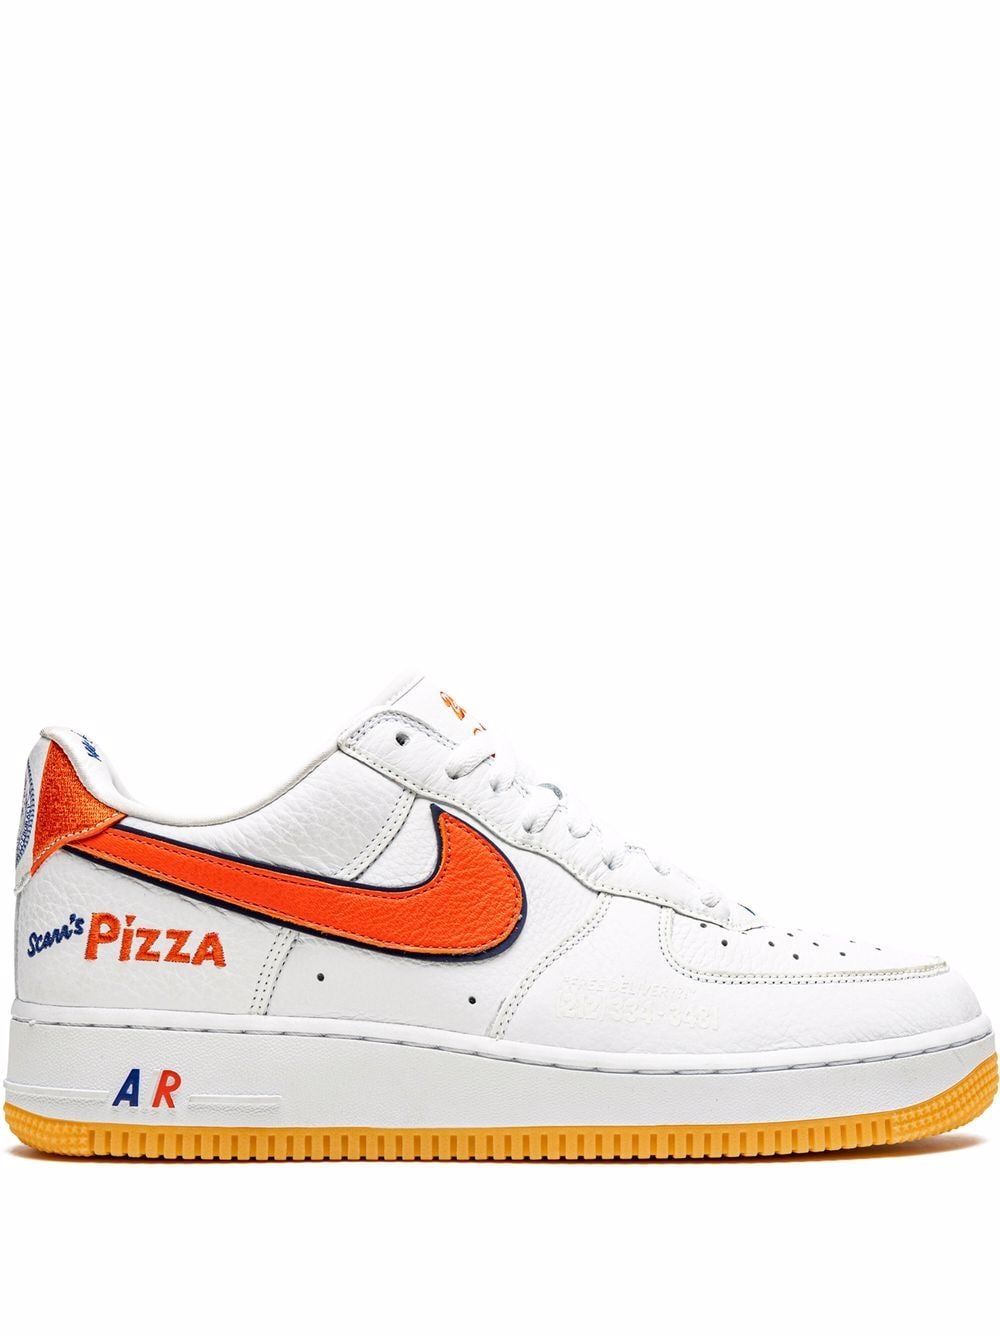 Image 1 of Nike x Scarr's Pizza Air Force 1 Low Sneakers